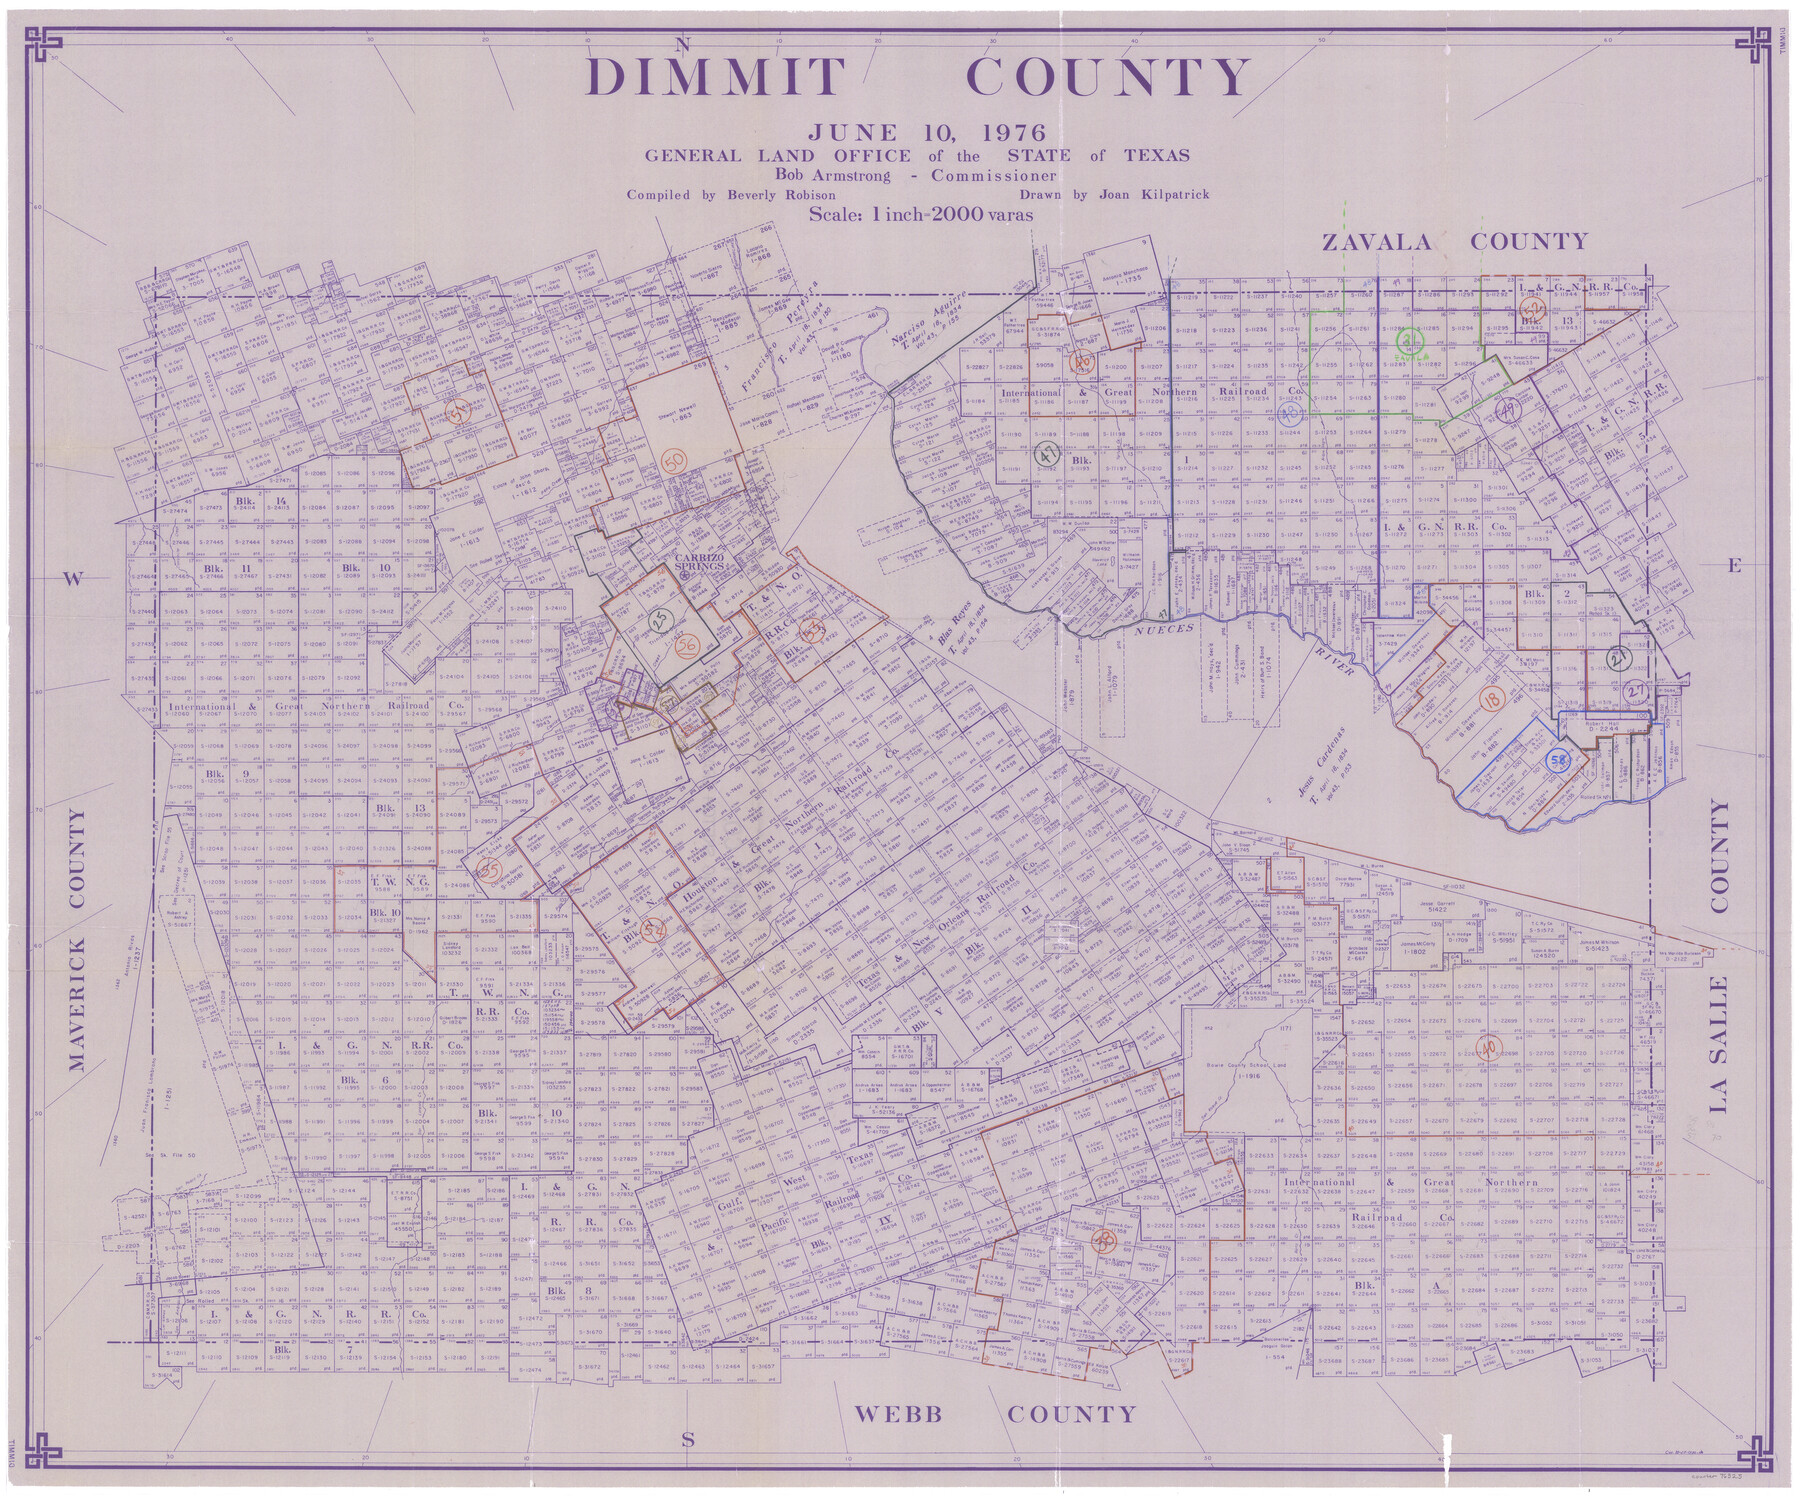 76525, Dimmit County Working Sketch Graphic Index - sheet B, General Map Collection